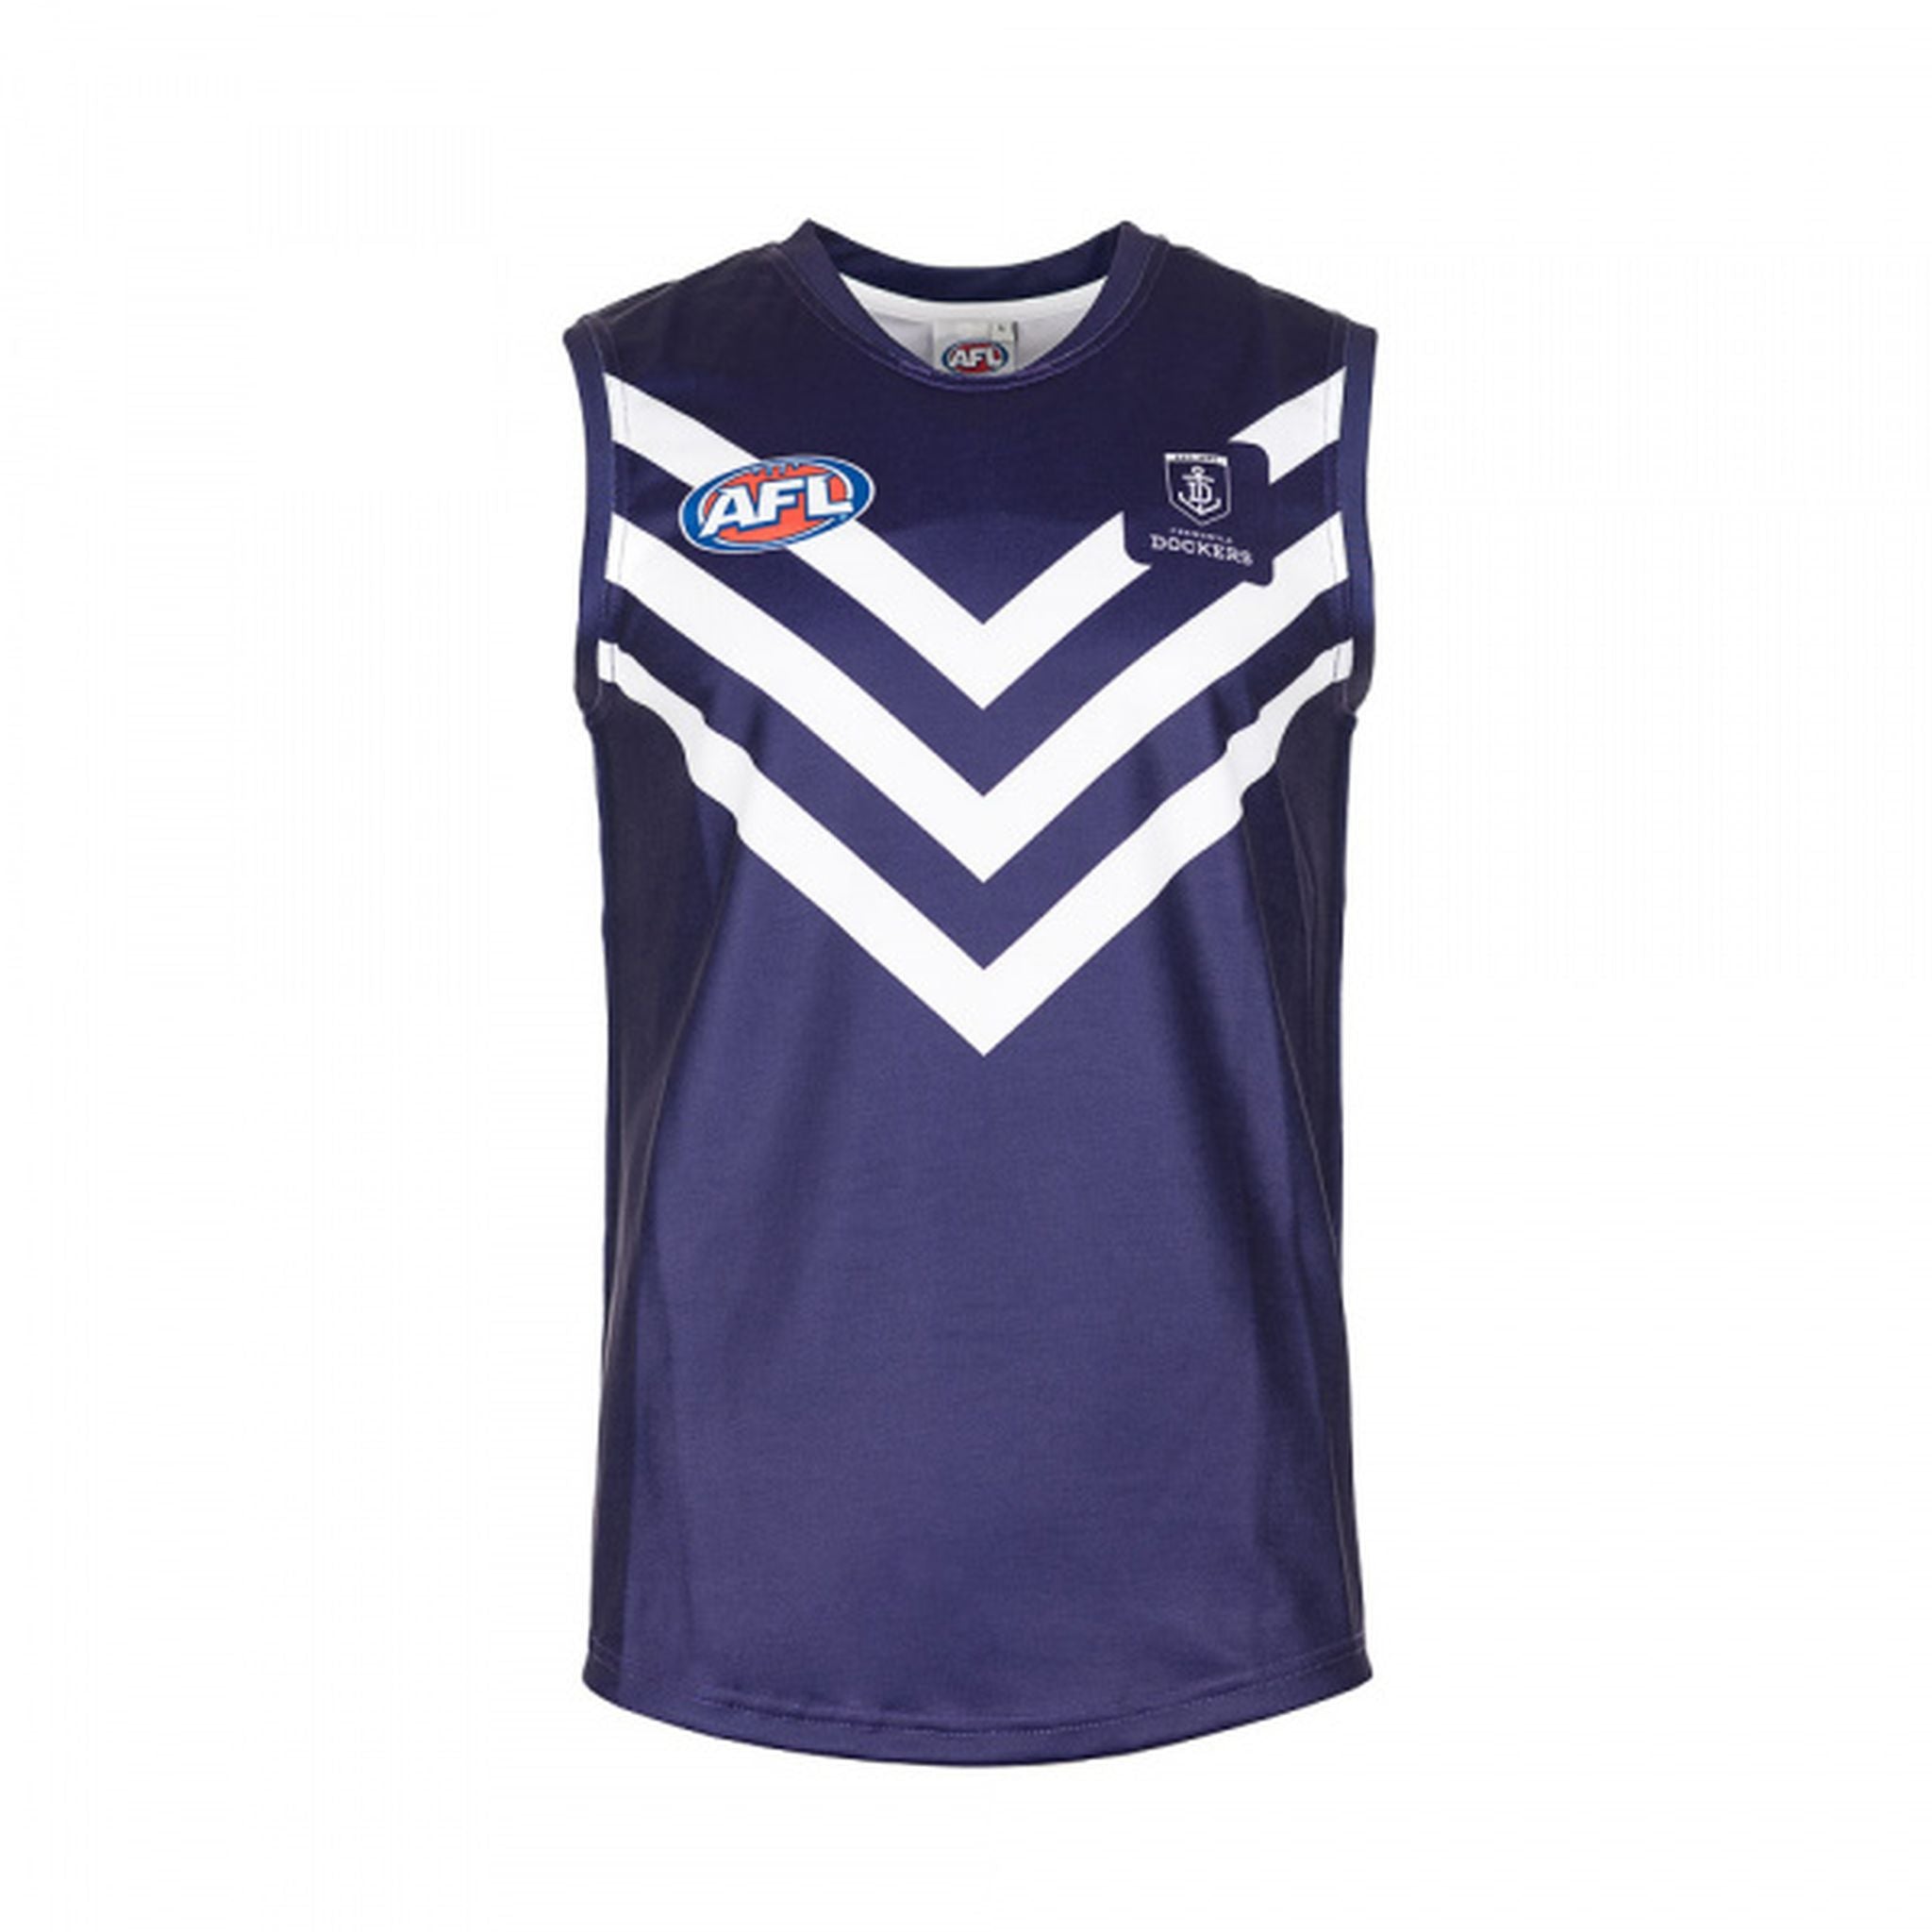 Burley Fremantle Dockers AFL Home Adults Replica Guernsey